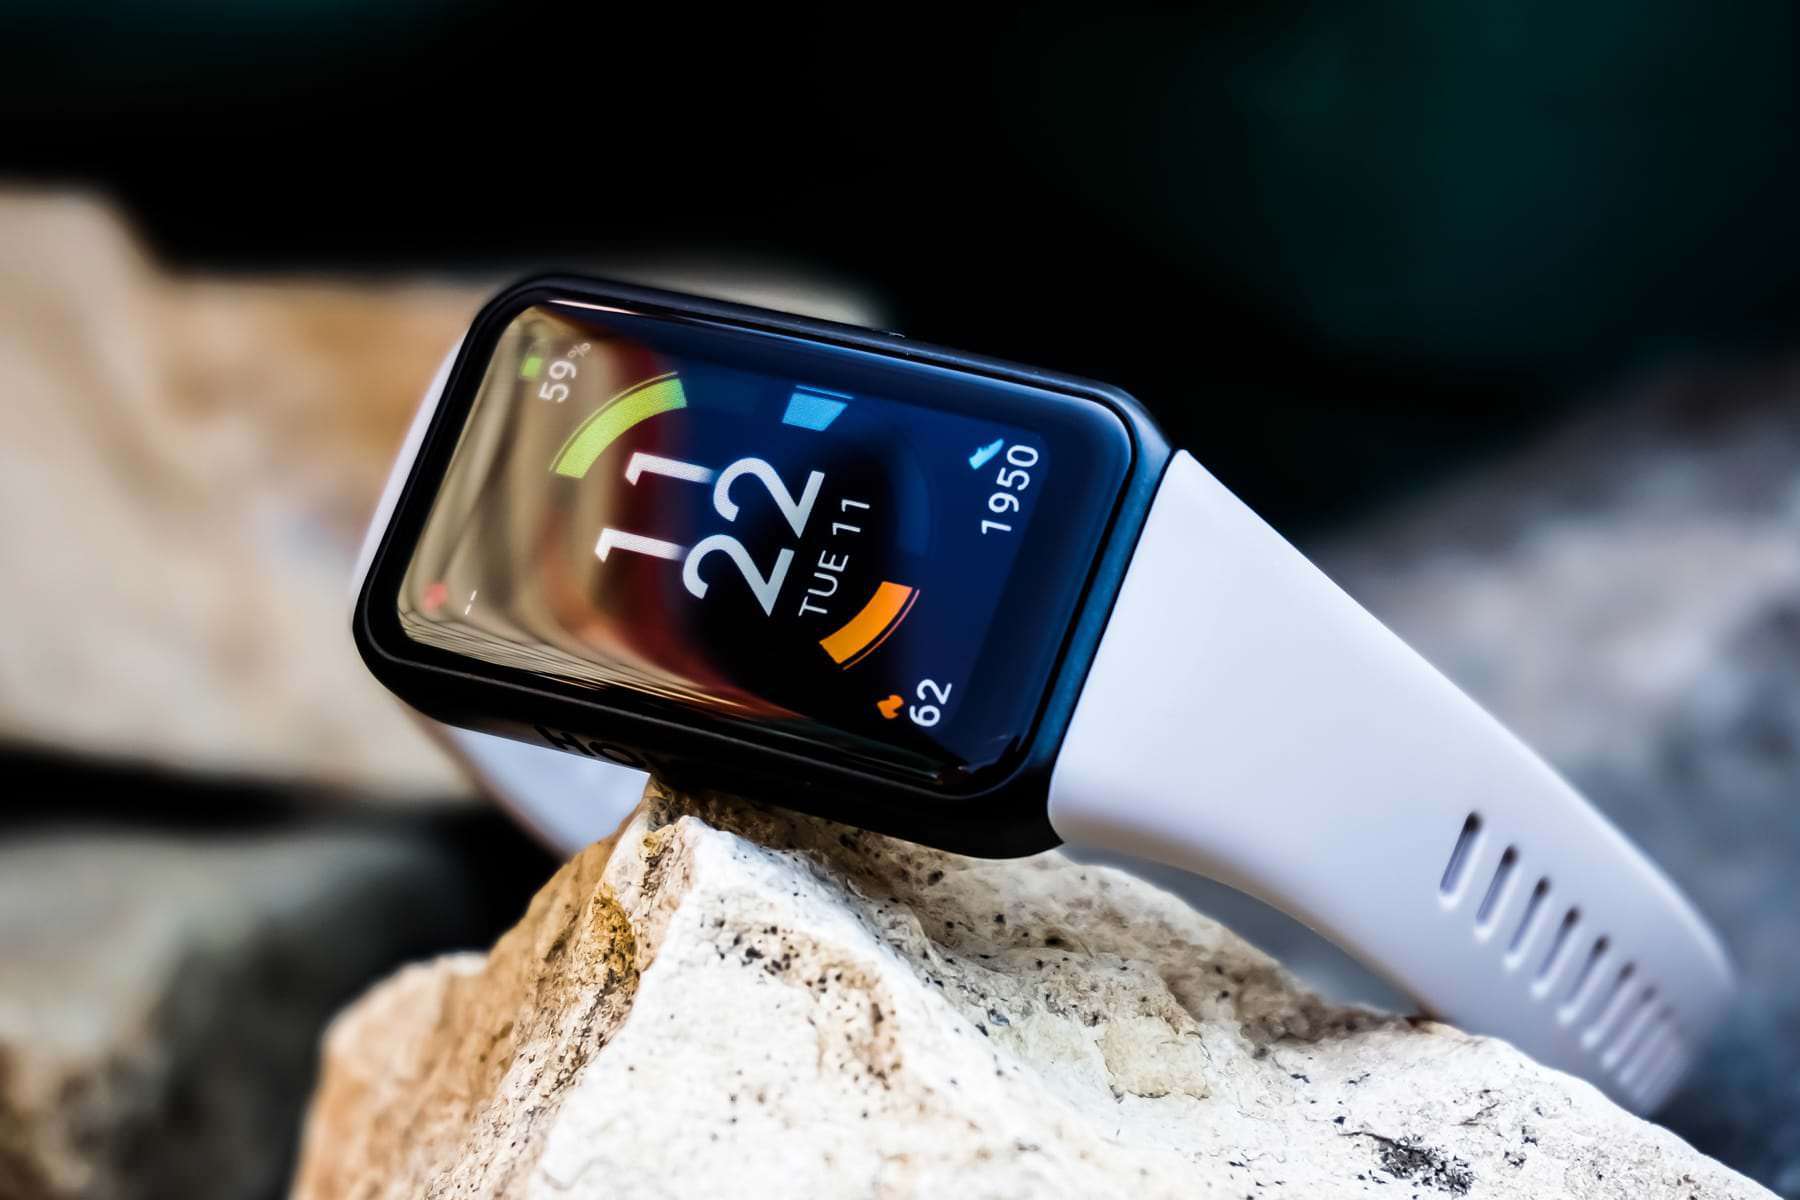 Xiaomi Mi Band 7 Might Come On May 10